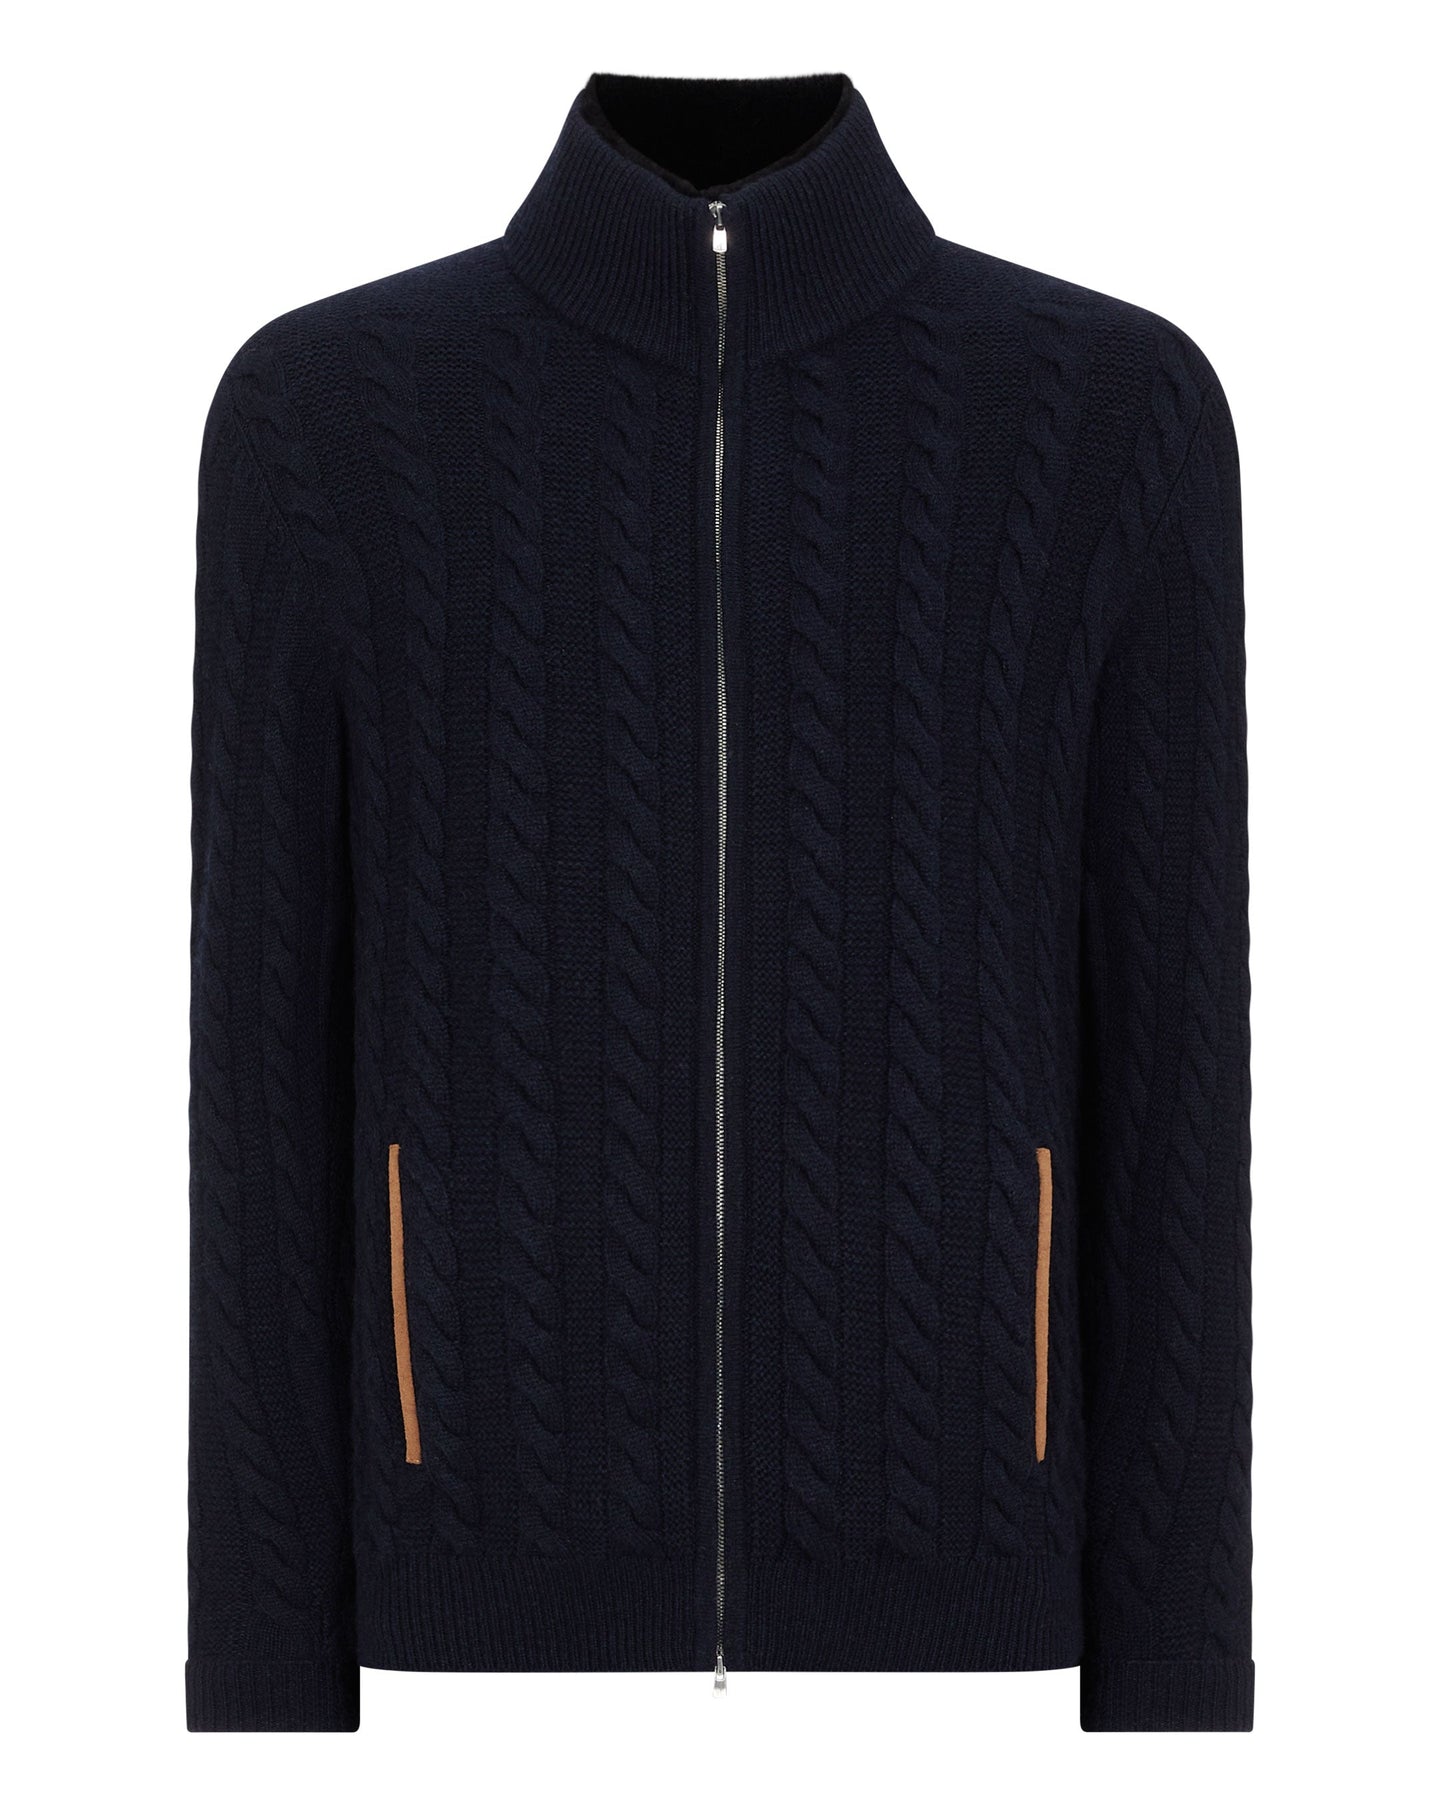 N.Peal Men's The Richmond Cable Cashmere Cardigan With Fur Collar Navy Blue